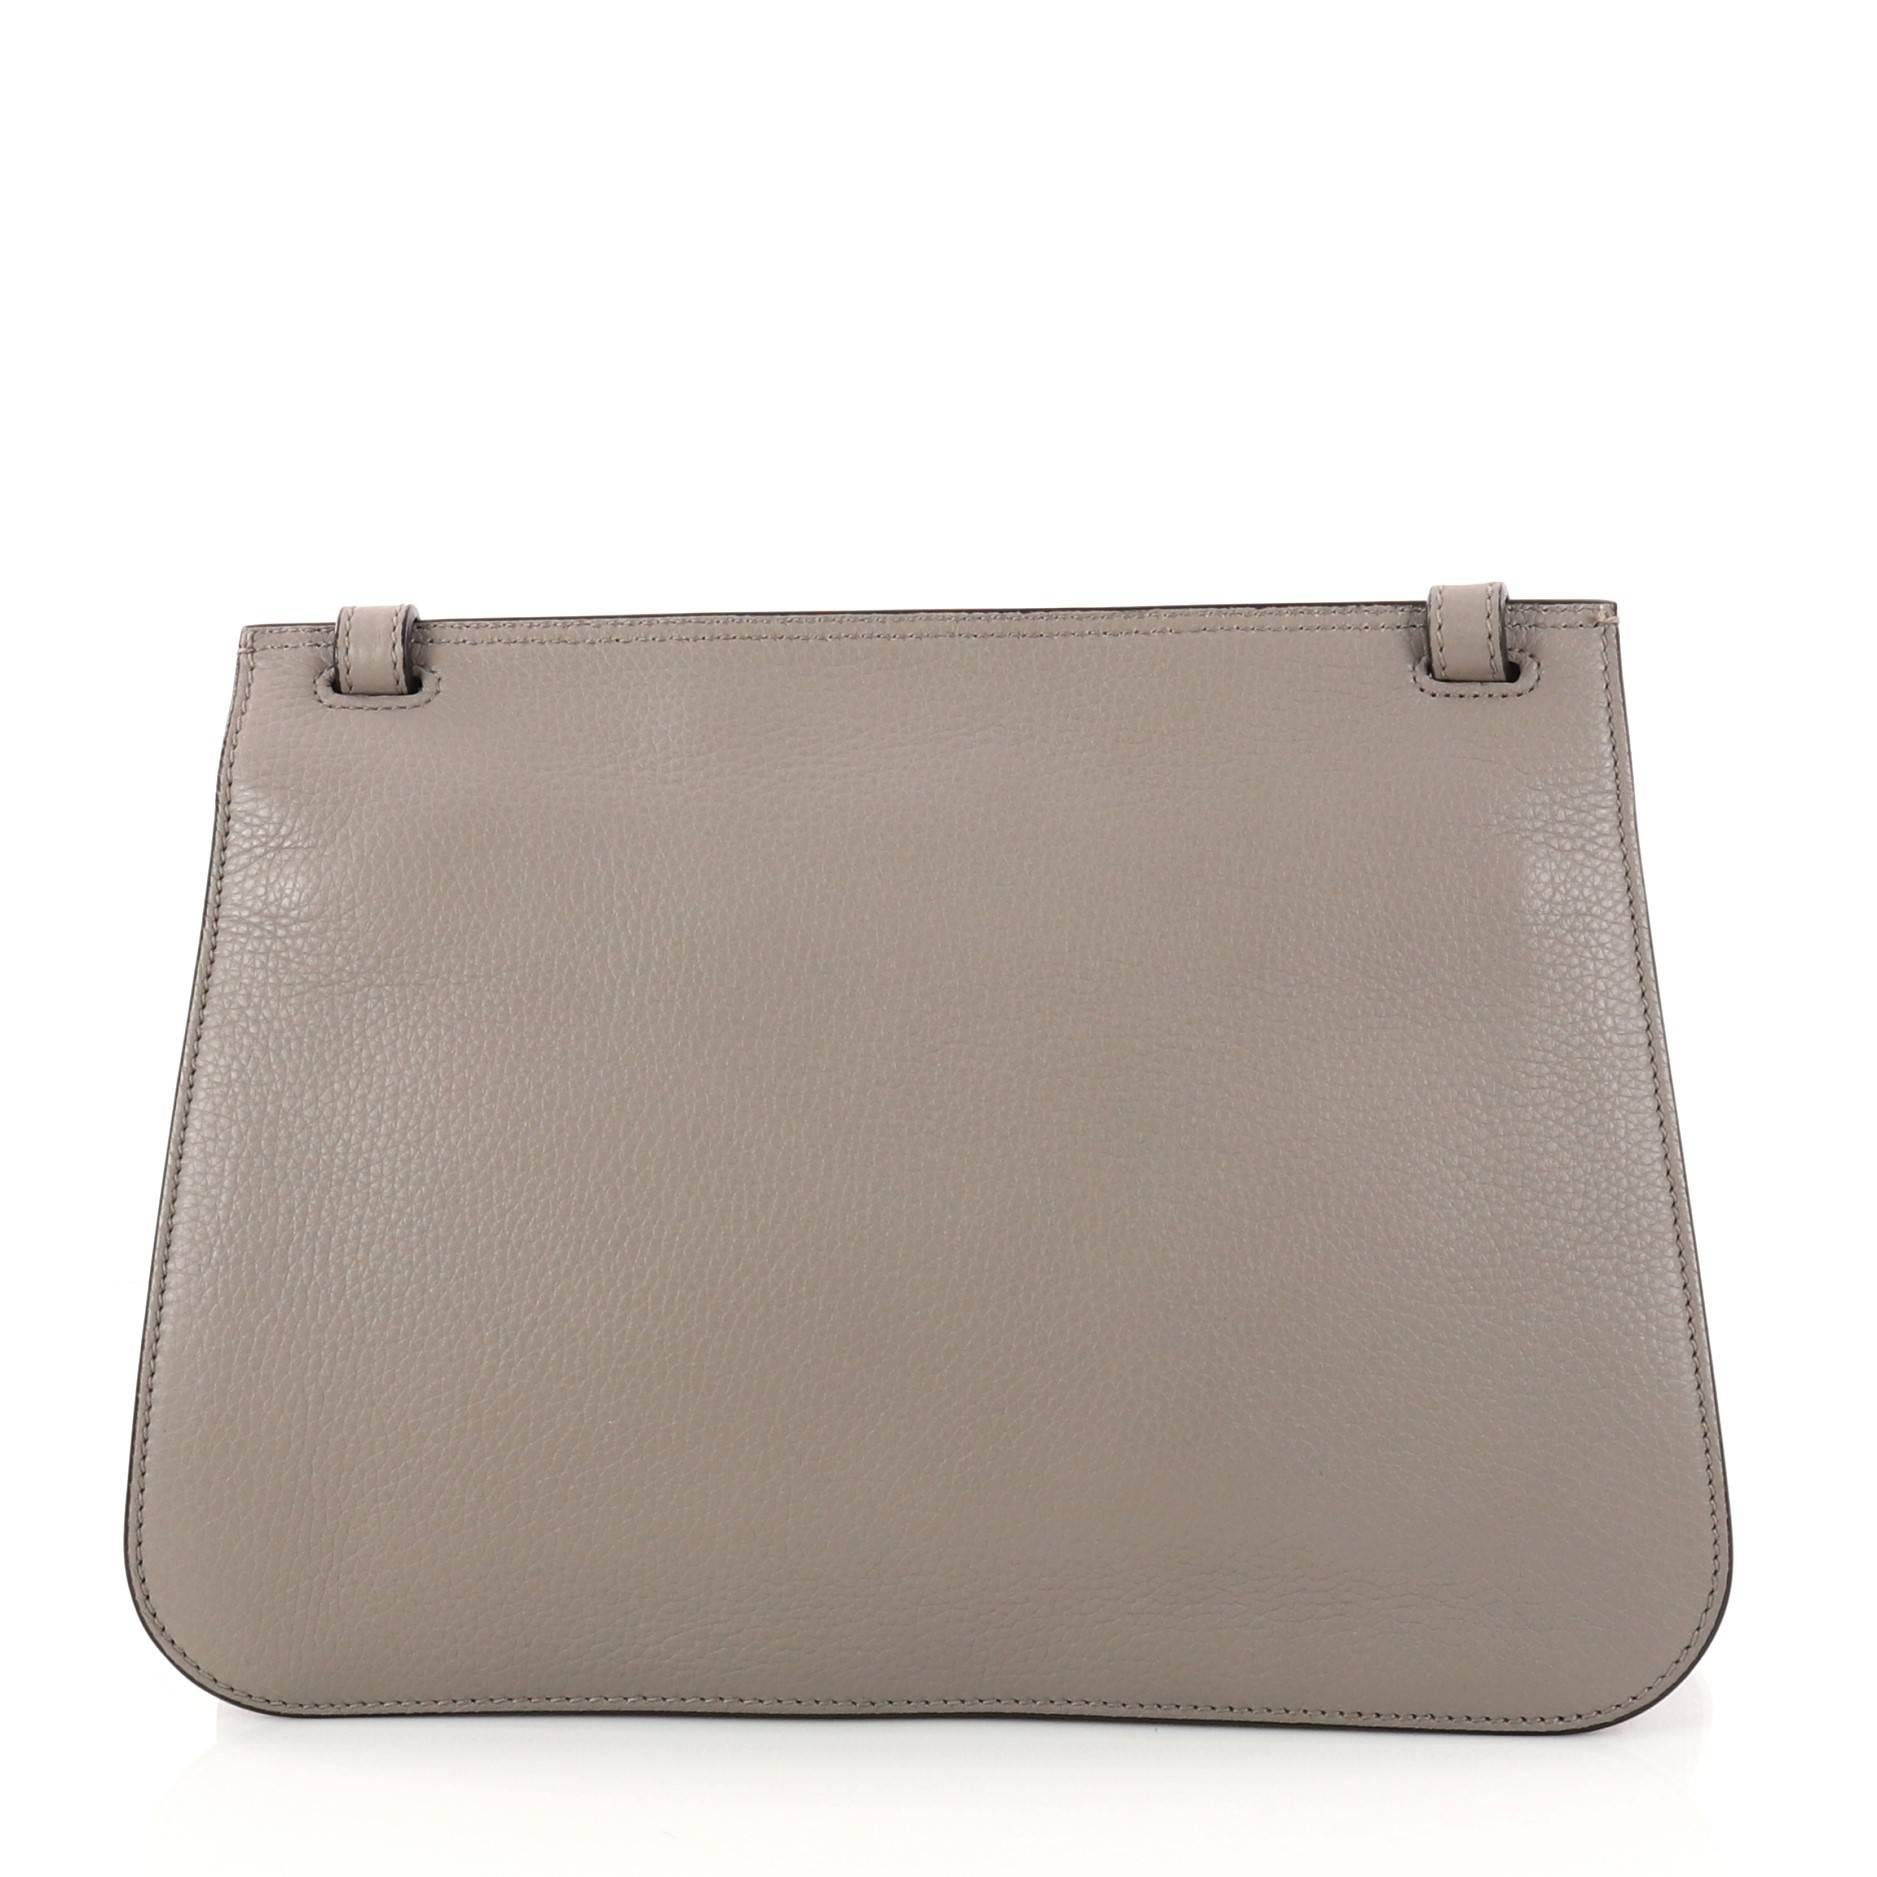 Gray Gucci Bamboo Daily Flap Bag Leather 